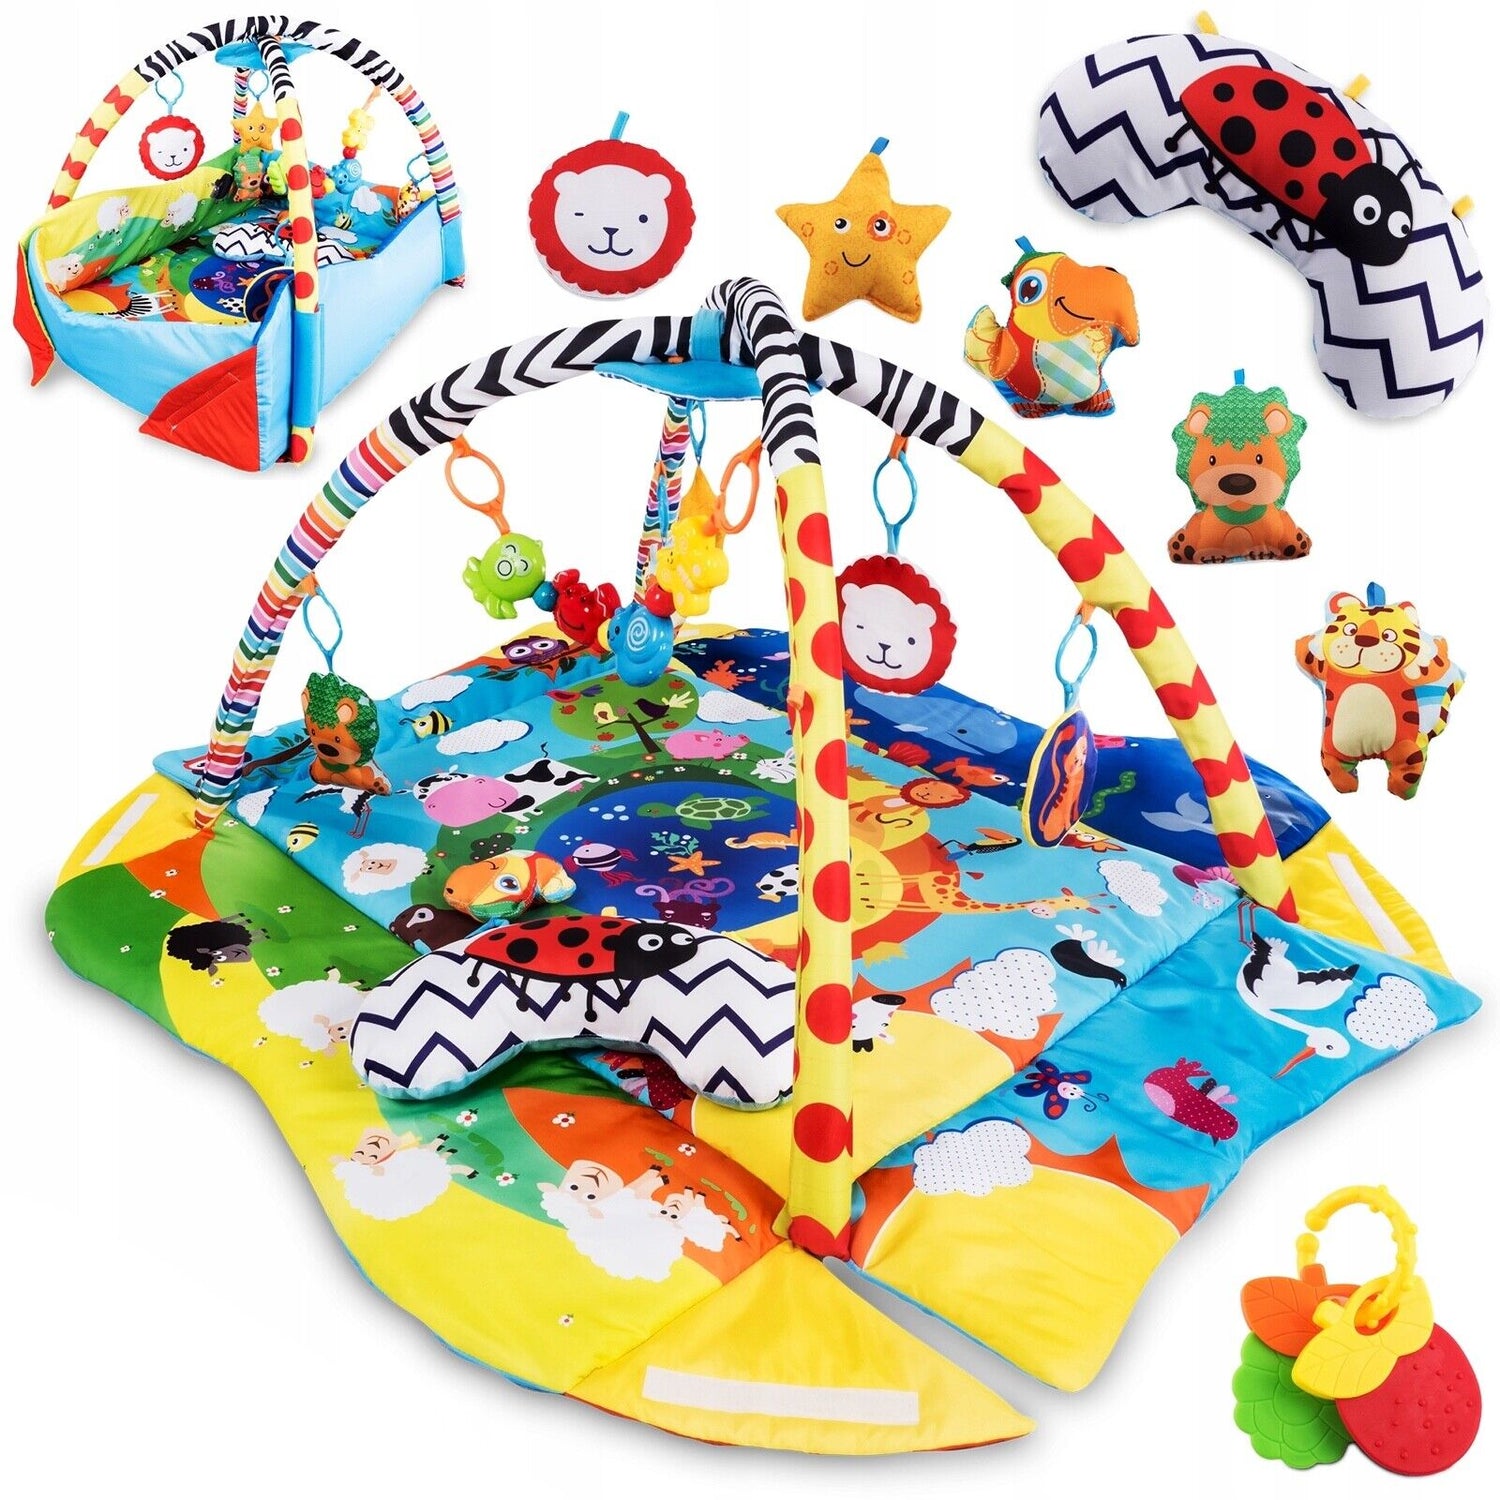 ANIKA Lionelo Baby Smartplay Activity Educational Playmat with Toys Tummy Time